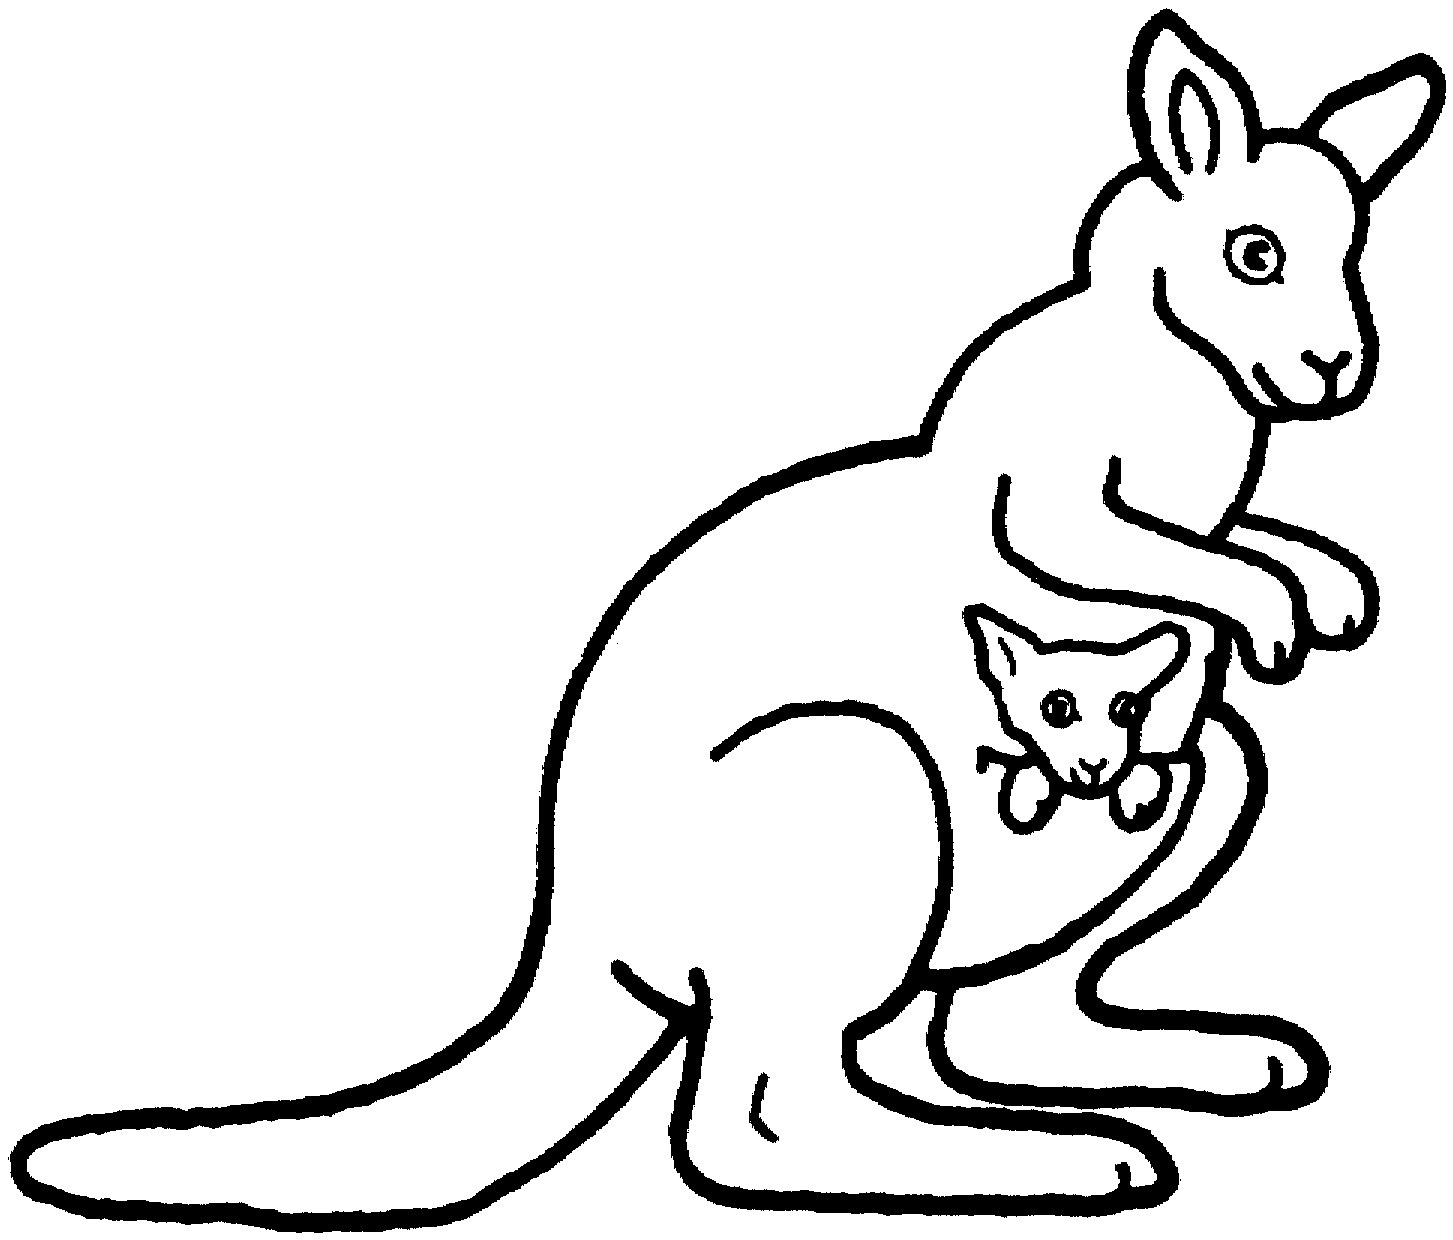 Coloring Kangaroo Coloring Page Puzzle Coloring Pages - Coloring Pages